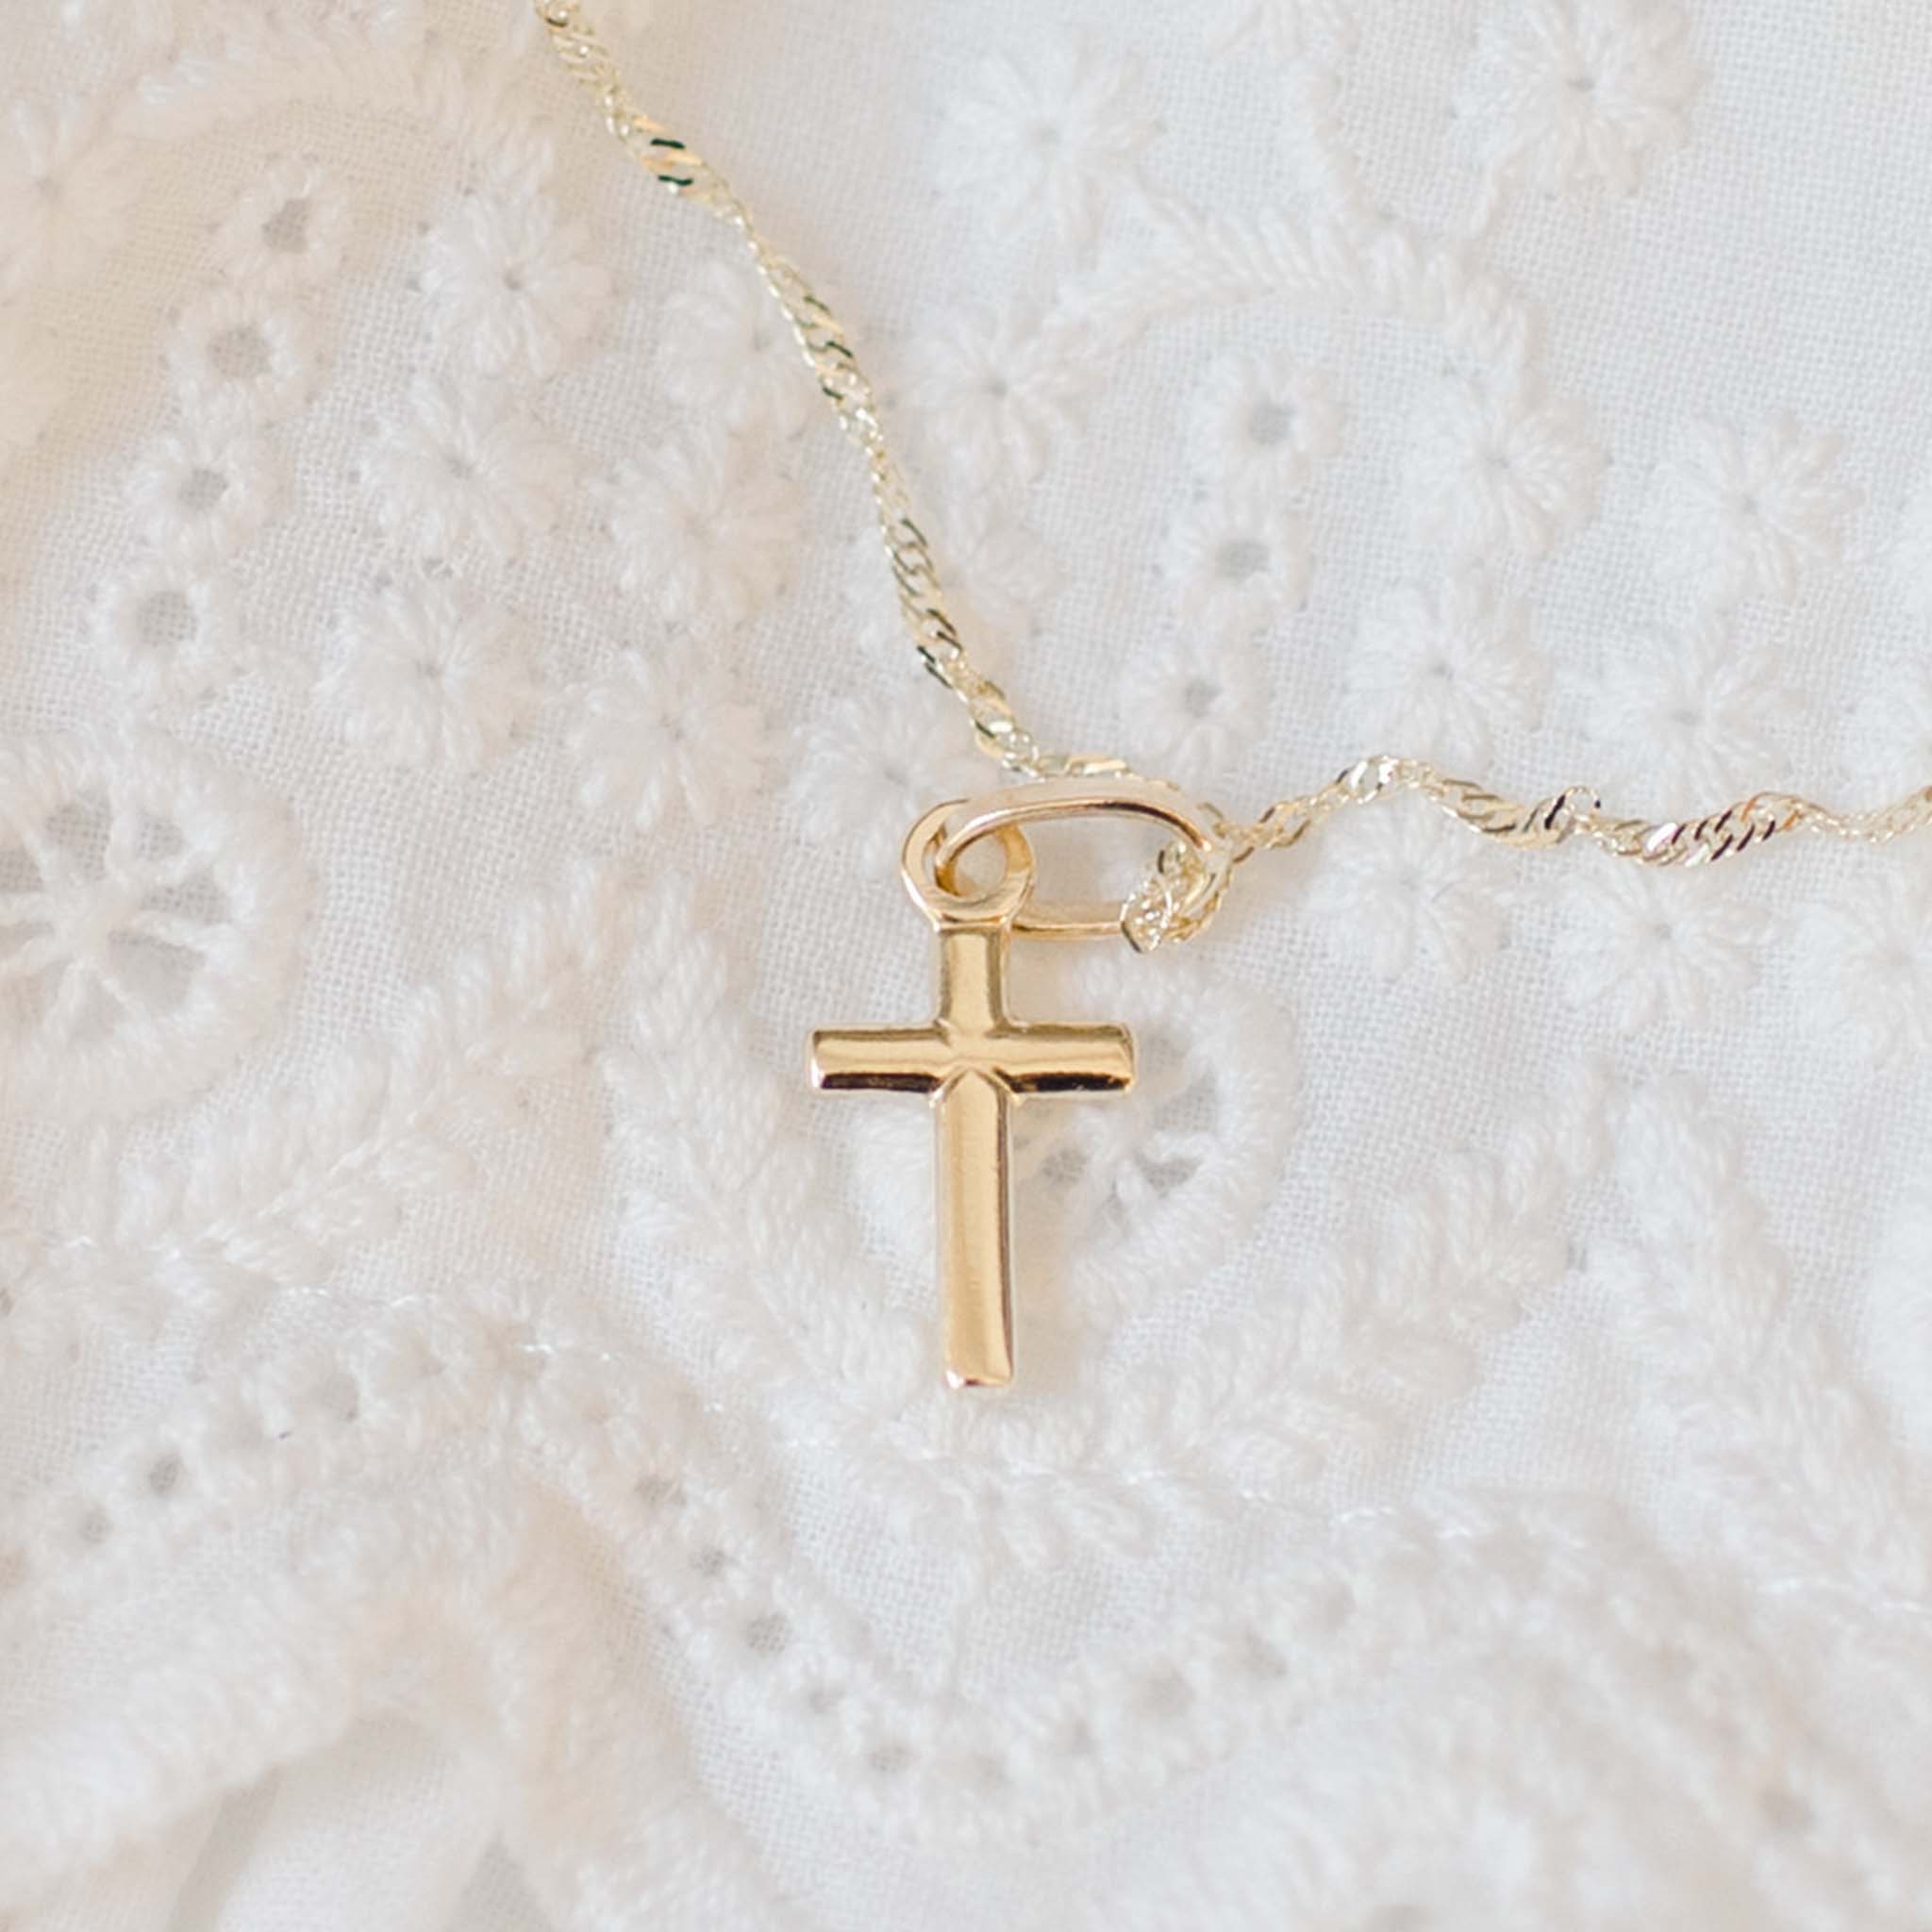 Cross 14k Gold With Chain Close Up 1175